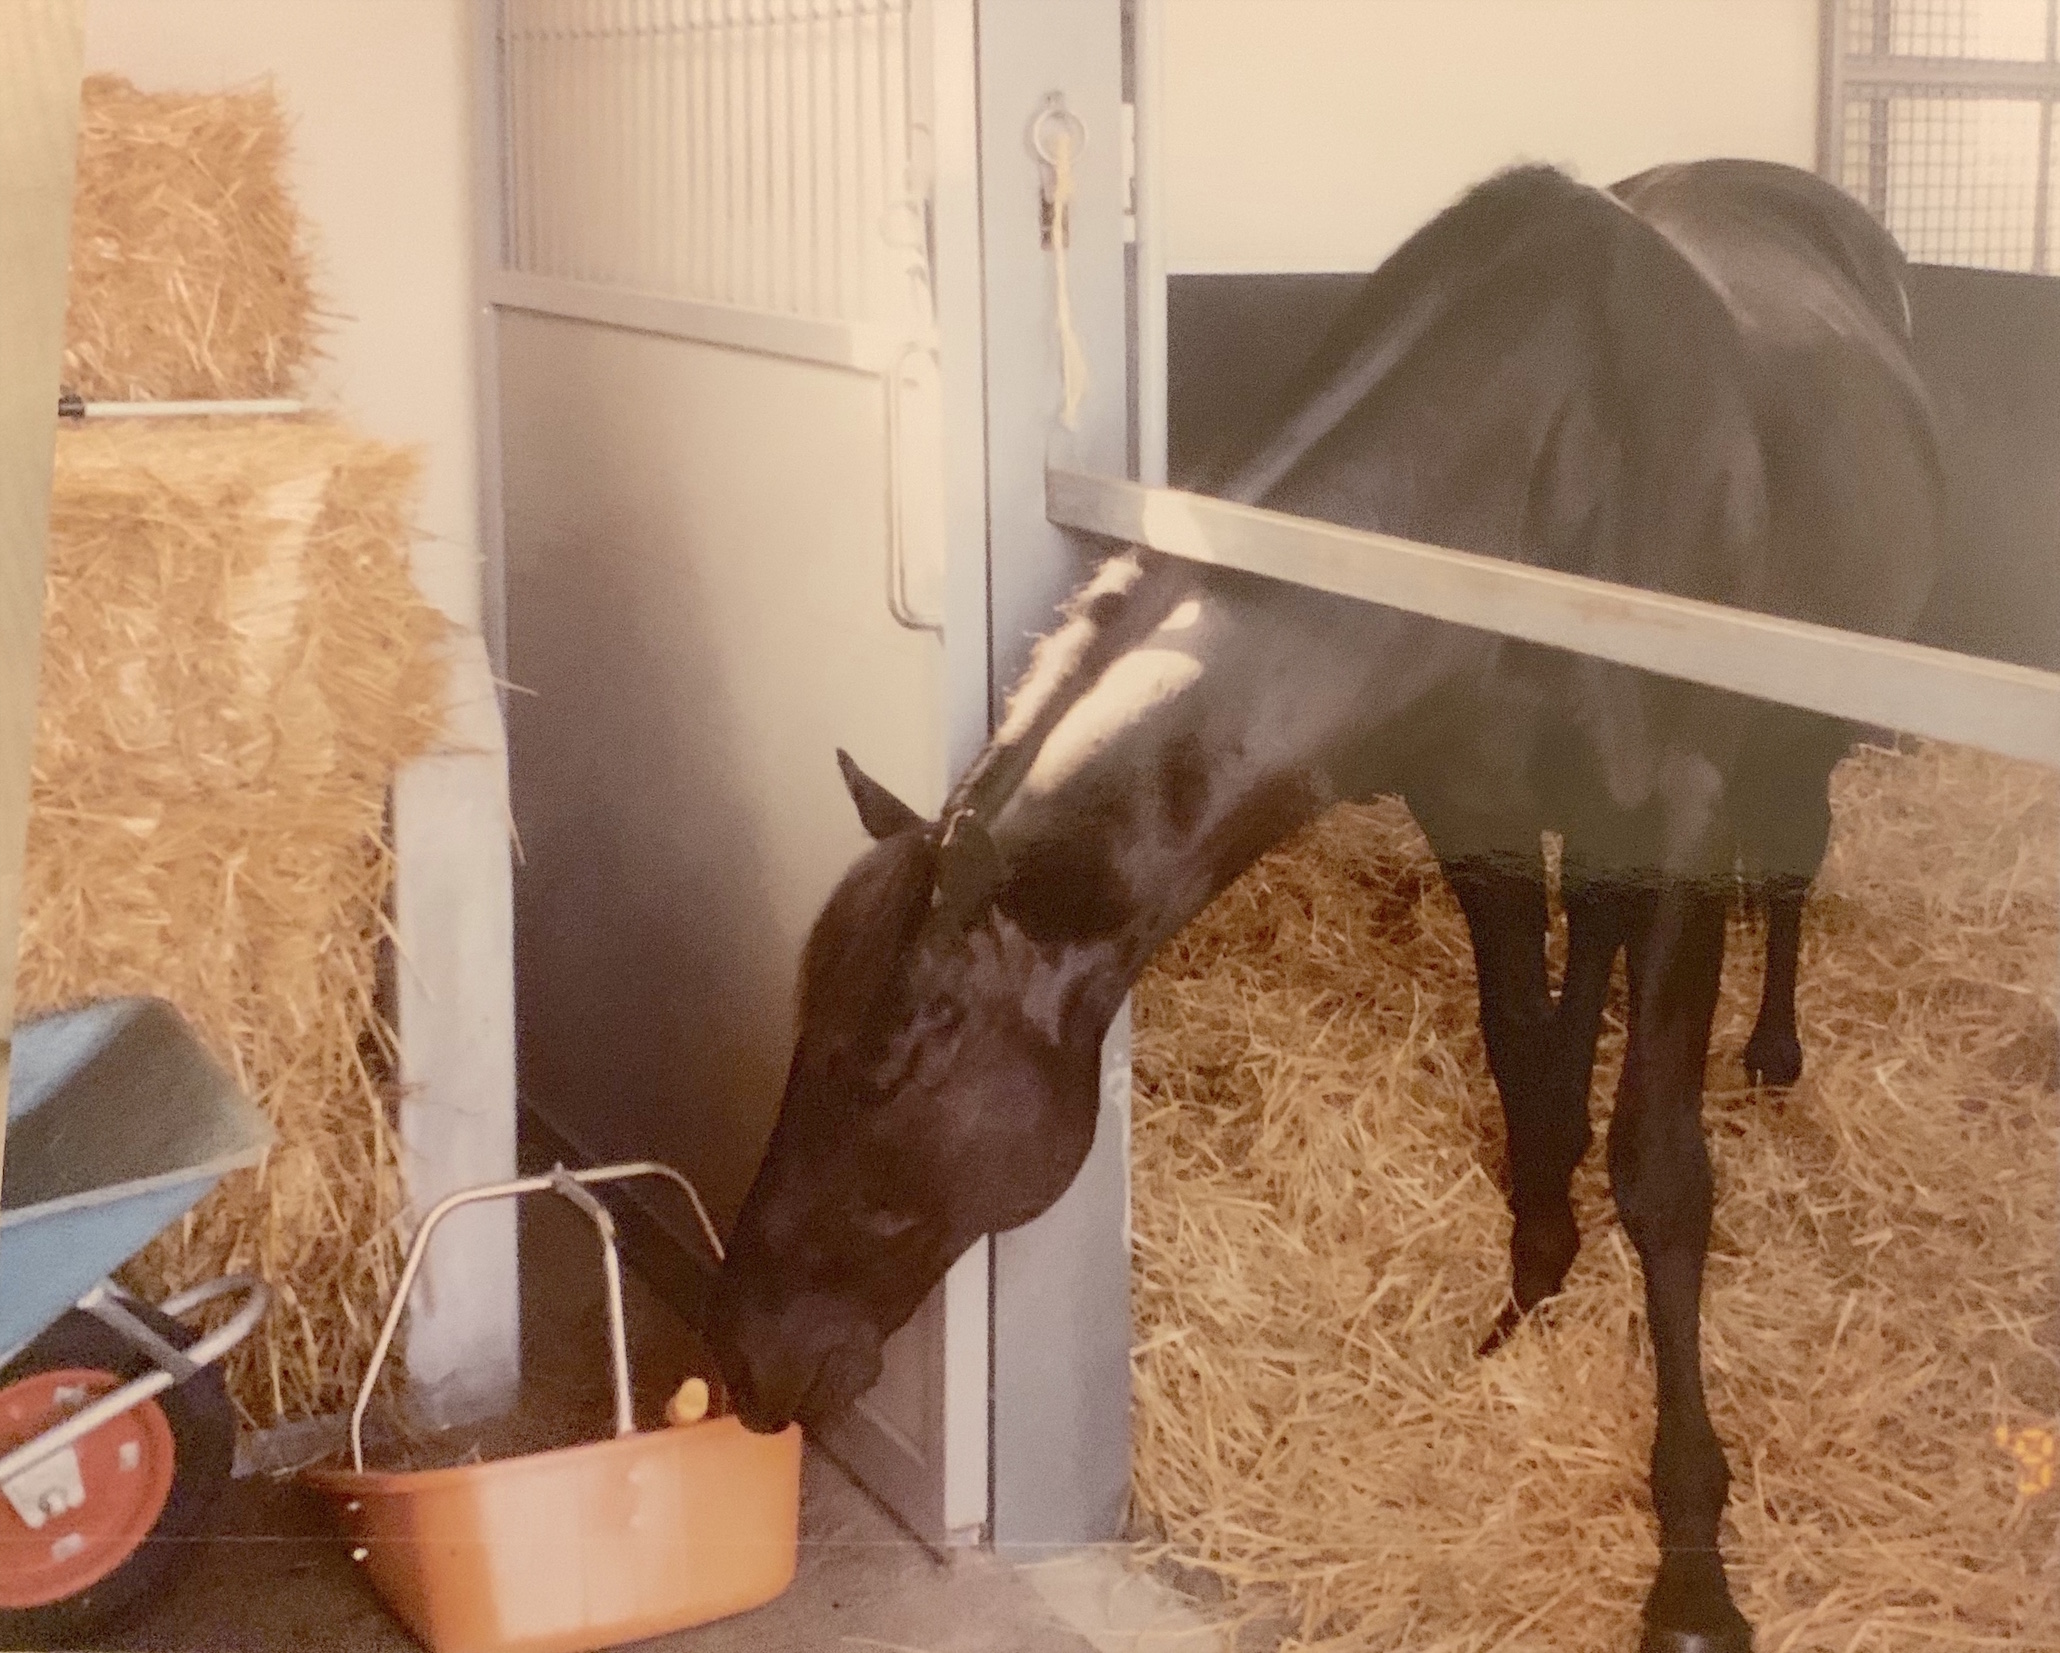 Erhaab, the 1994 Derby winner bred at Sheikh Hamdan’s Shadwell Farm in Kentucky, pictured during his four-year stint at stud in Japan. Photo: Kent Barnes